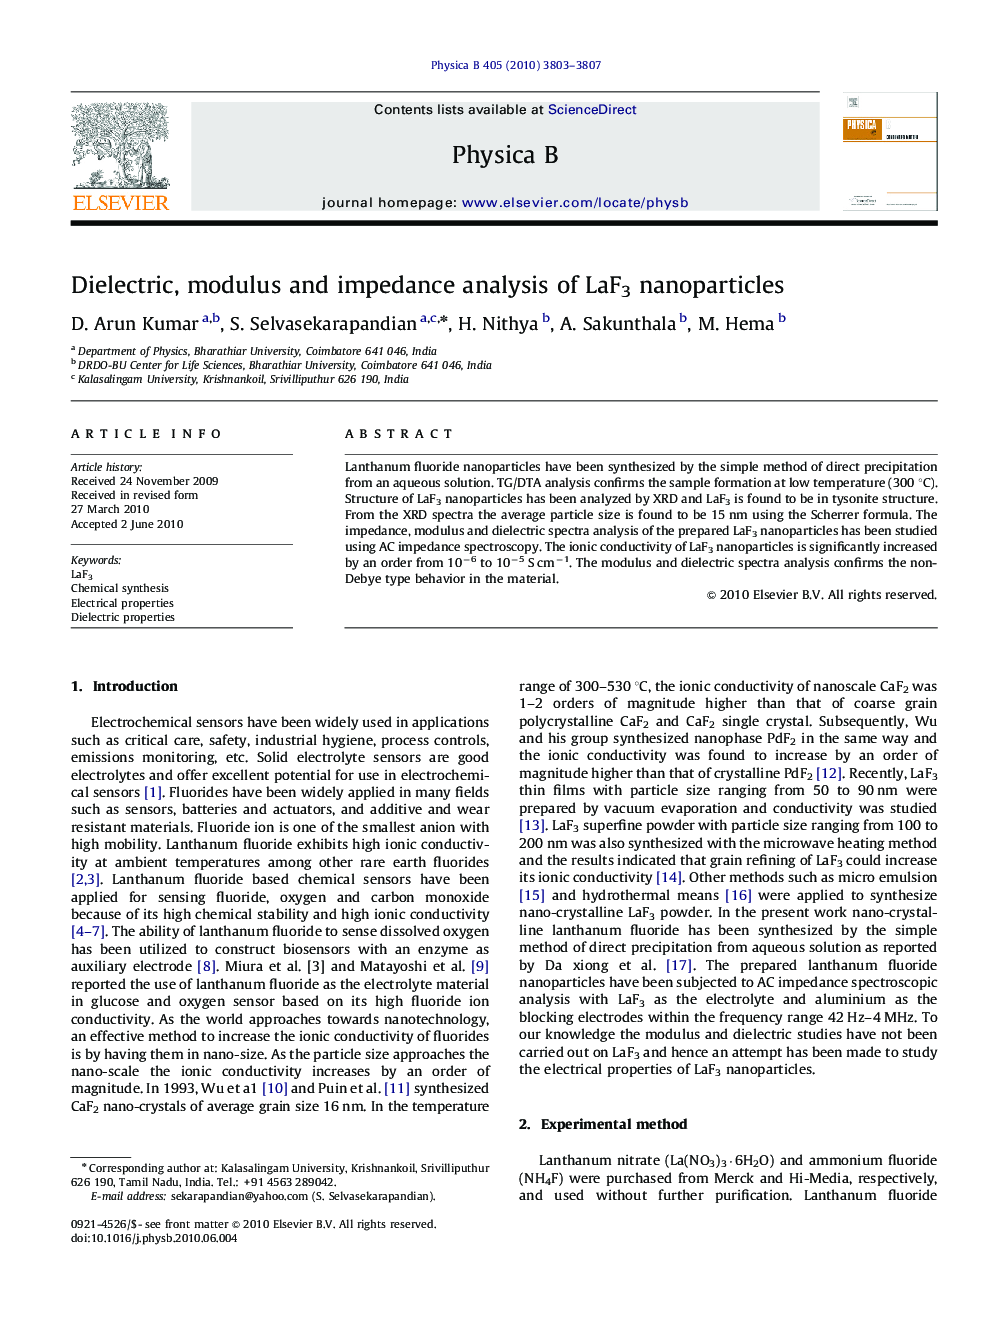 Dielectric, modulus and impedance analysis of LaF3 nanoparticles